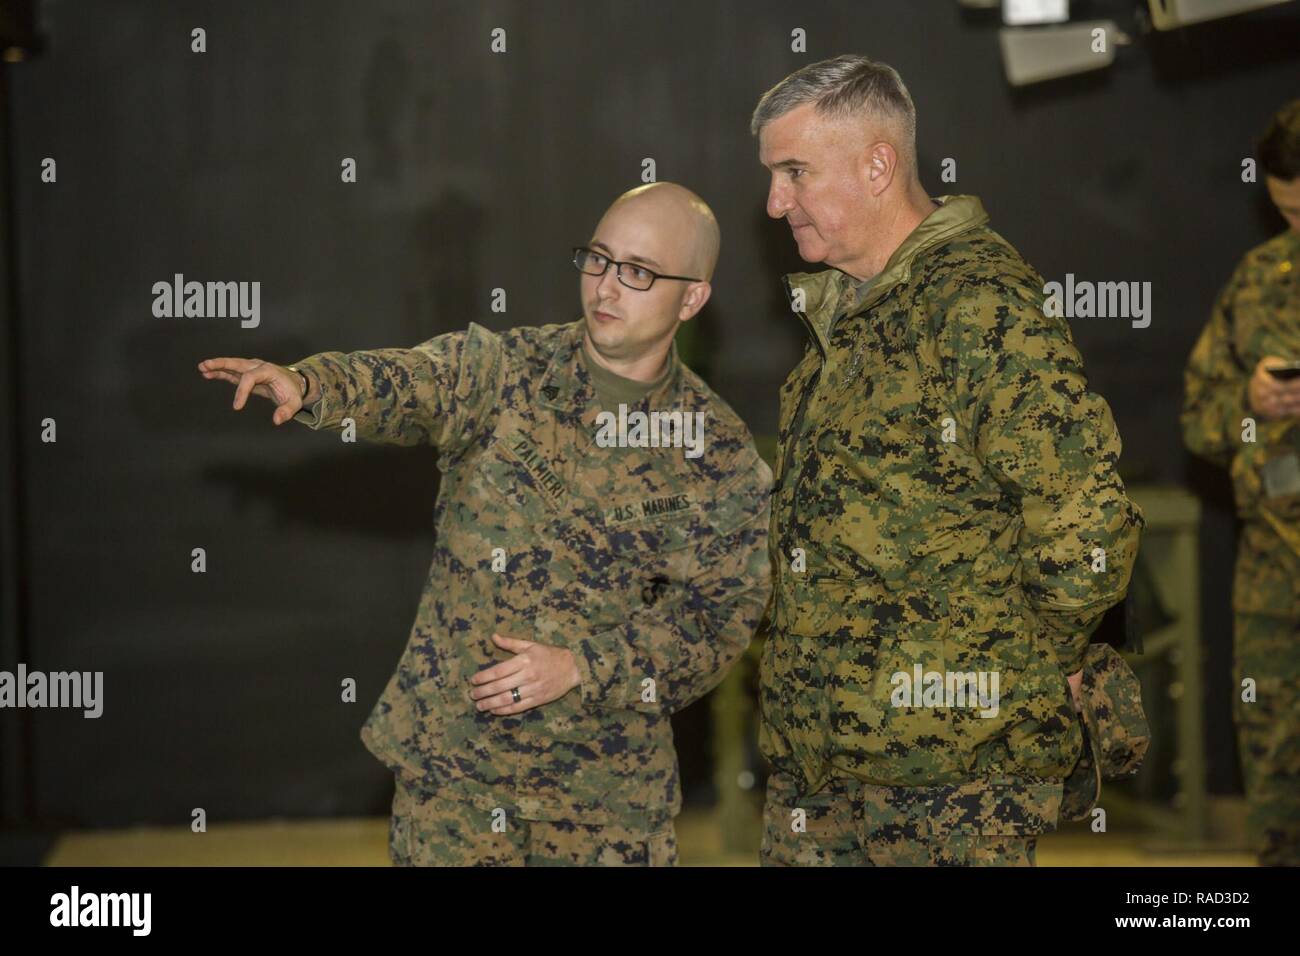 U.S. Marine Corps Sgt. Matthew N. Palmieri IV, left, rifleman, Division Combat Skills Center, Headquarters Battalion, 2nd Marine Division, briefs Gen. Glenn Walters the Assistant Commandant of the Marine Corps on the usage of simulator training systems during a visit to Camp Lejeune, N.C., Jan. 27, 2017. The purpose of the visit was to increase awareness and capabilities of ground simulation and simulator training systems in support of operational forces combat readiness. Stock Photo